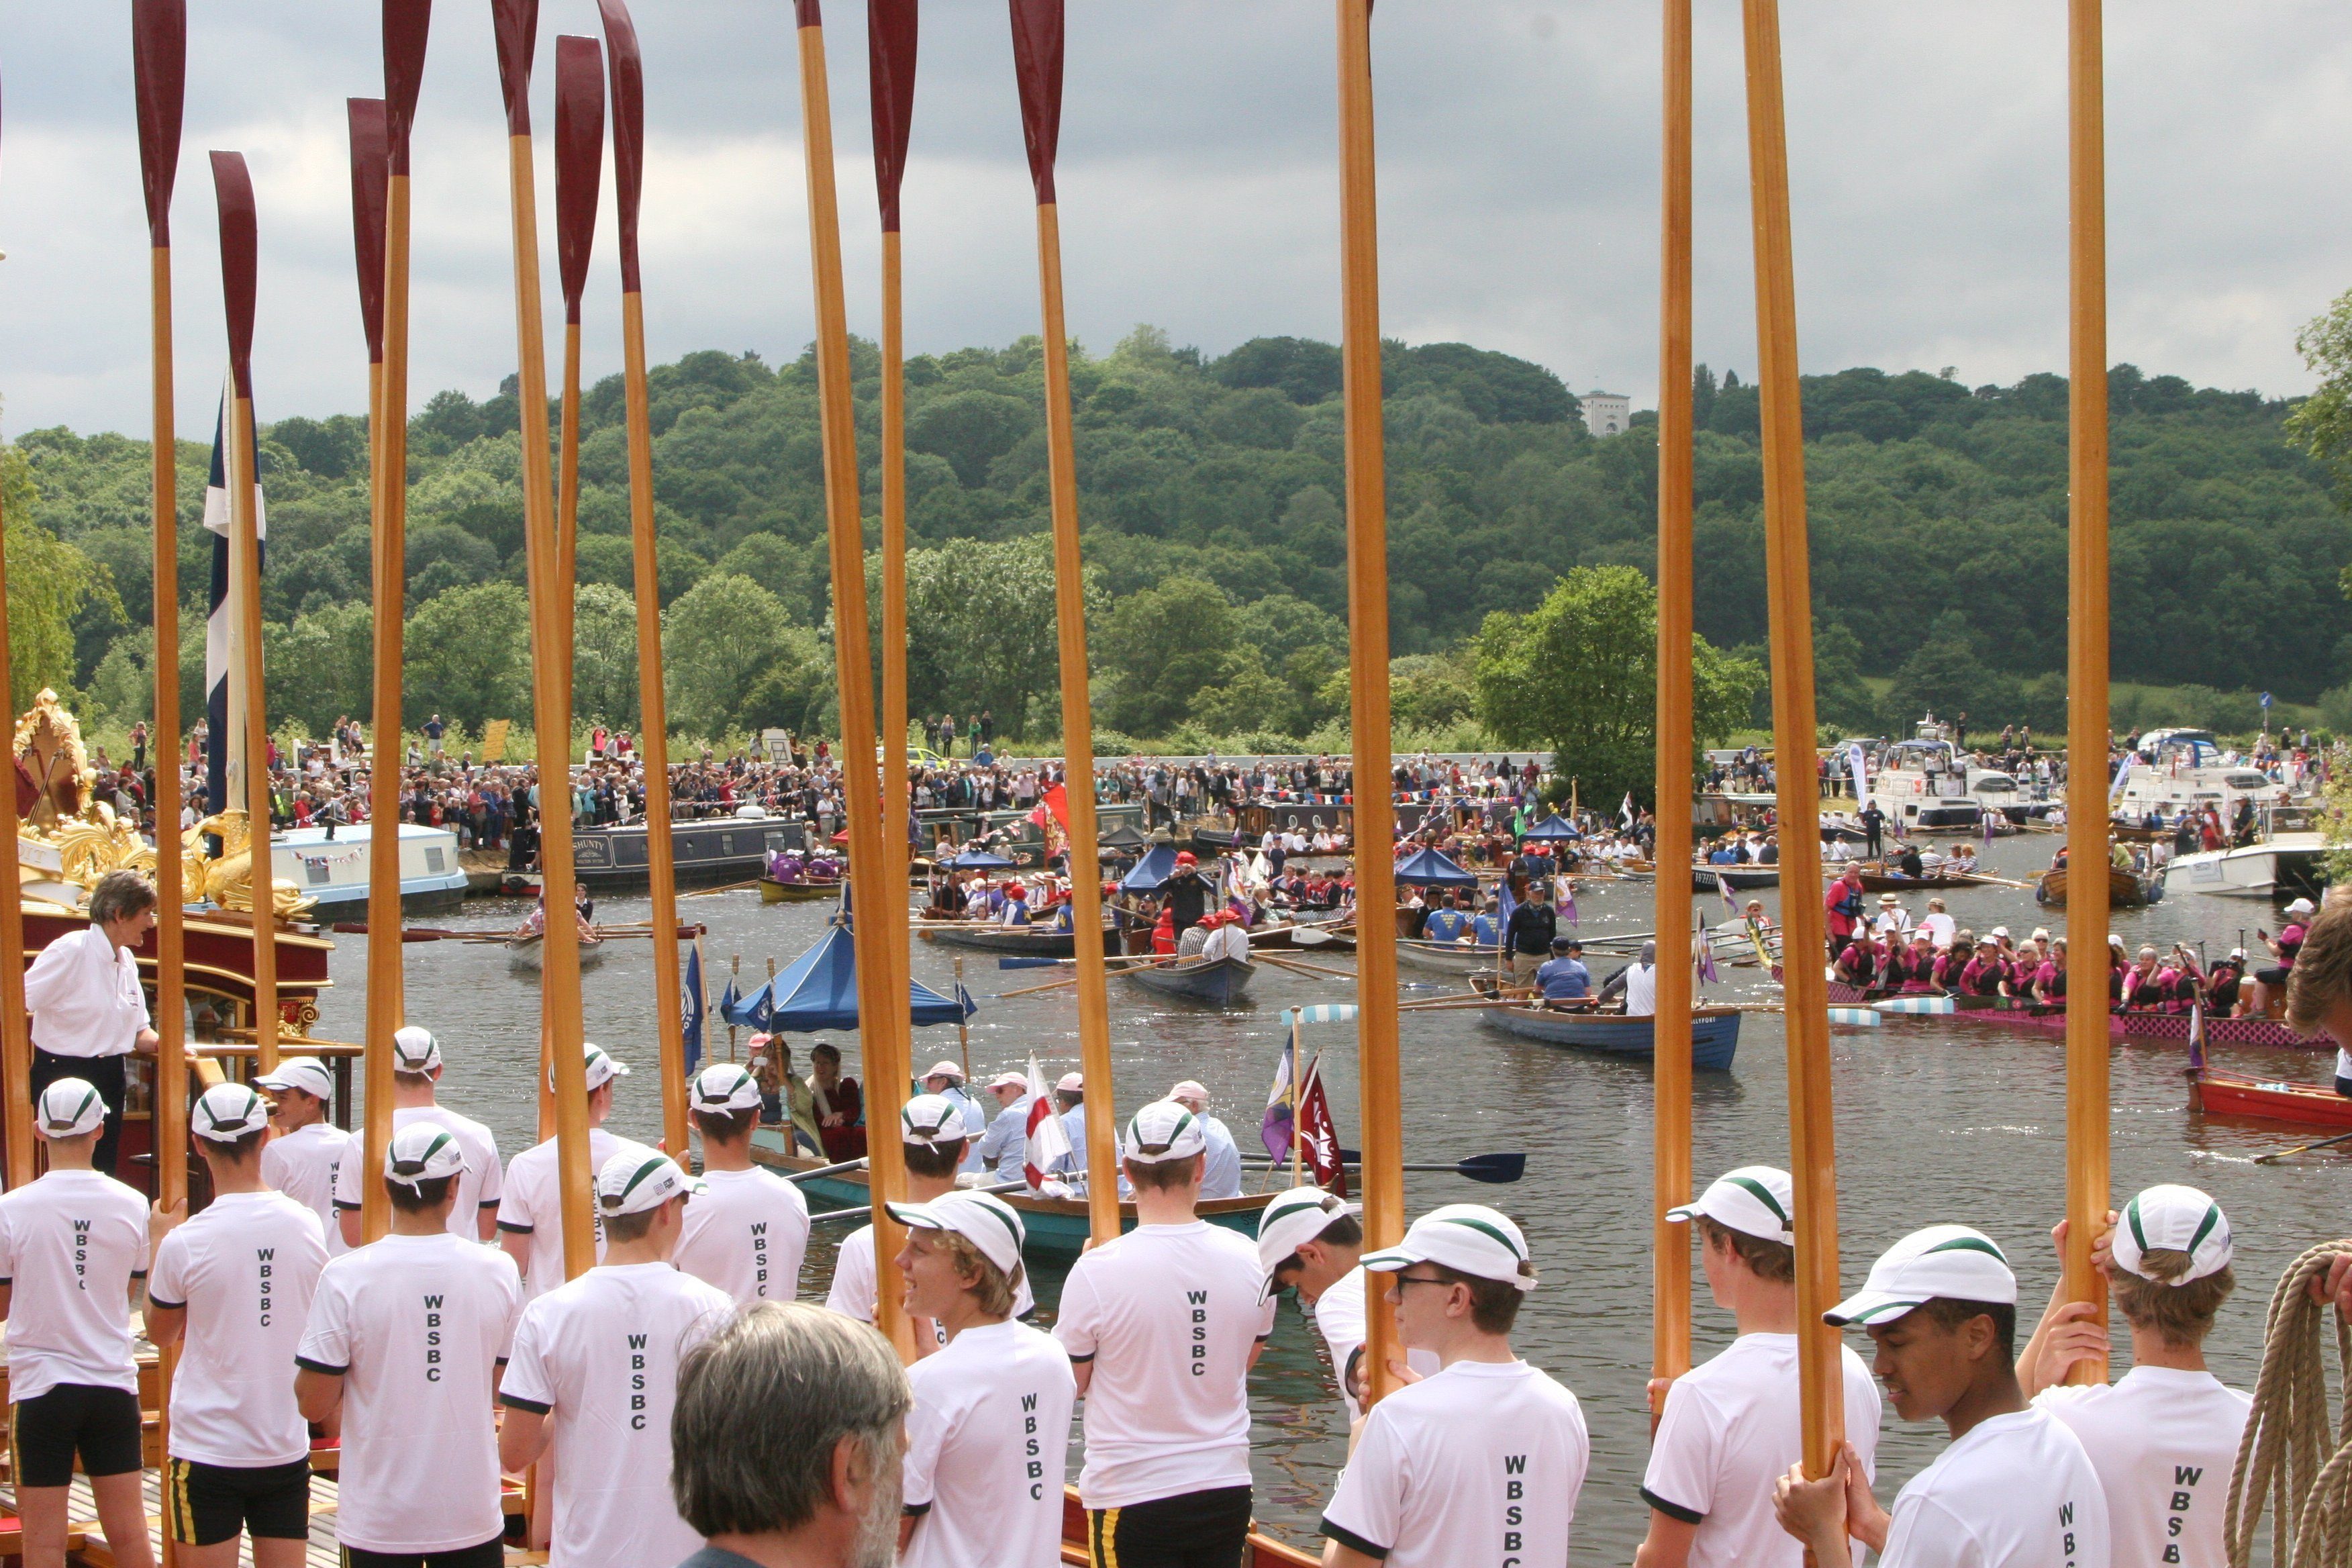 Magna Carta 800 Years Celebrations at Runnymede with crowds. Gloriana and tossed oars by Windsor boys